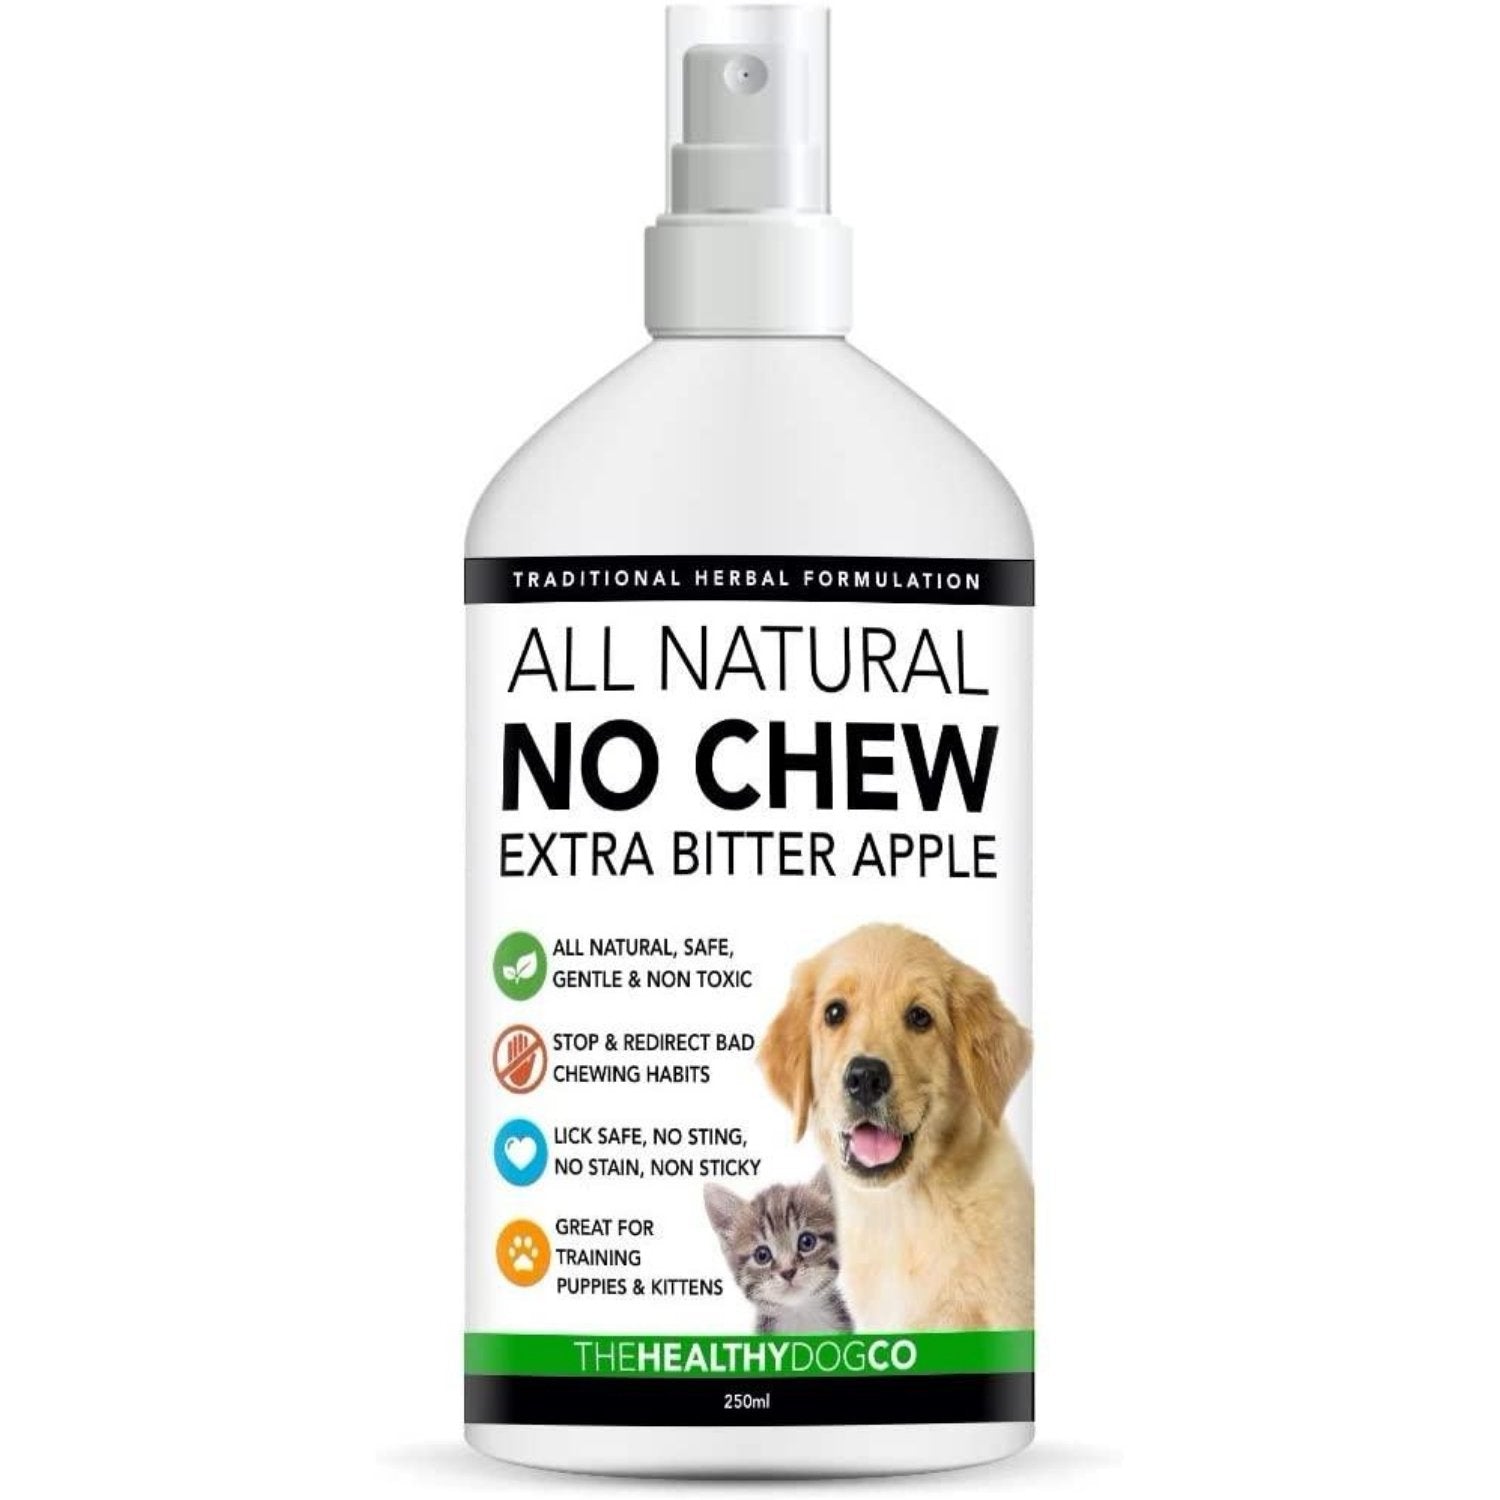 All-Natural No Chew Extra Bitter Apple Spray - The Healthy Dog Co